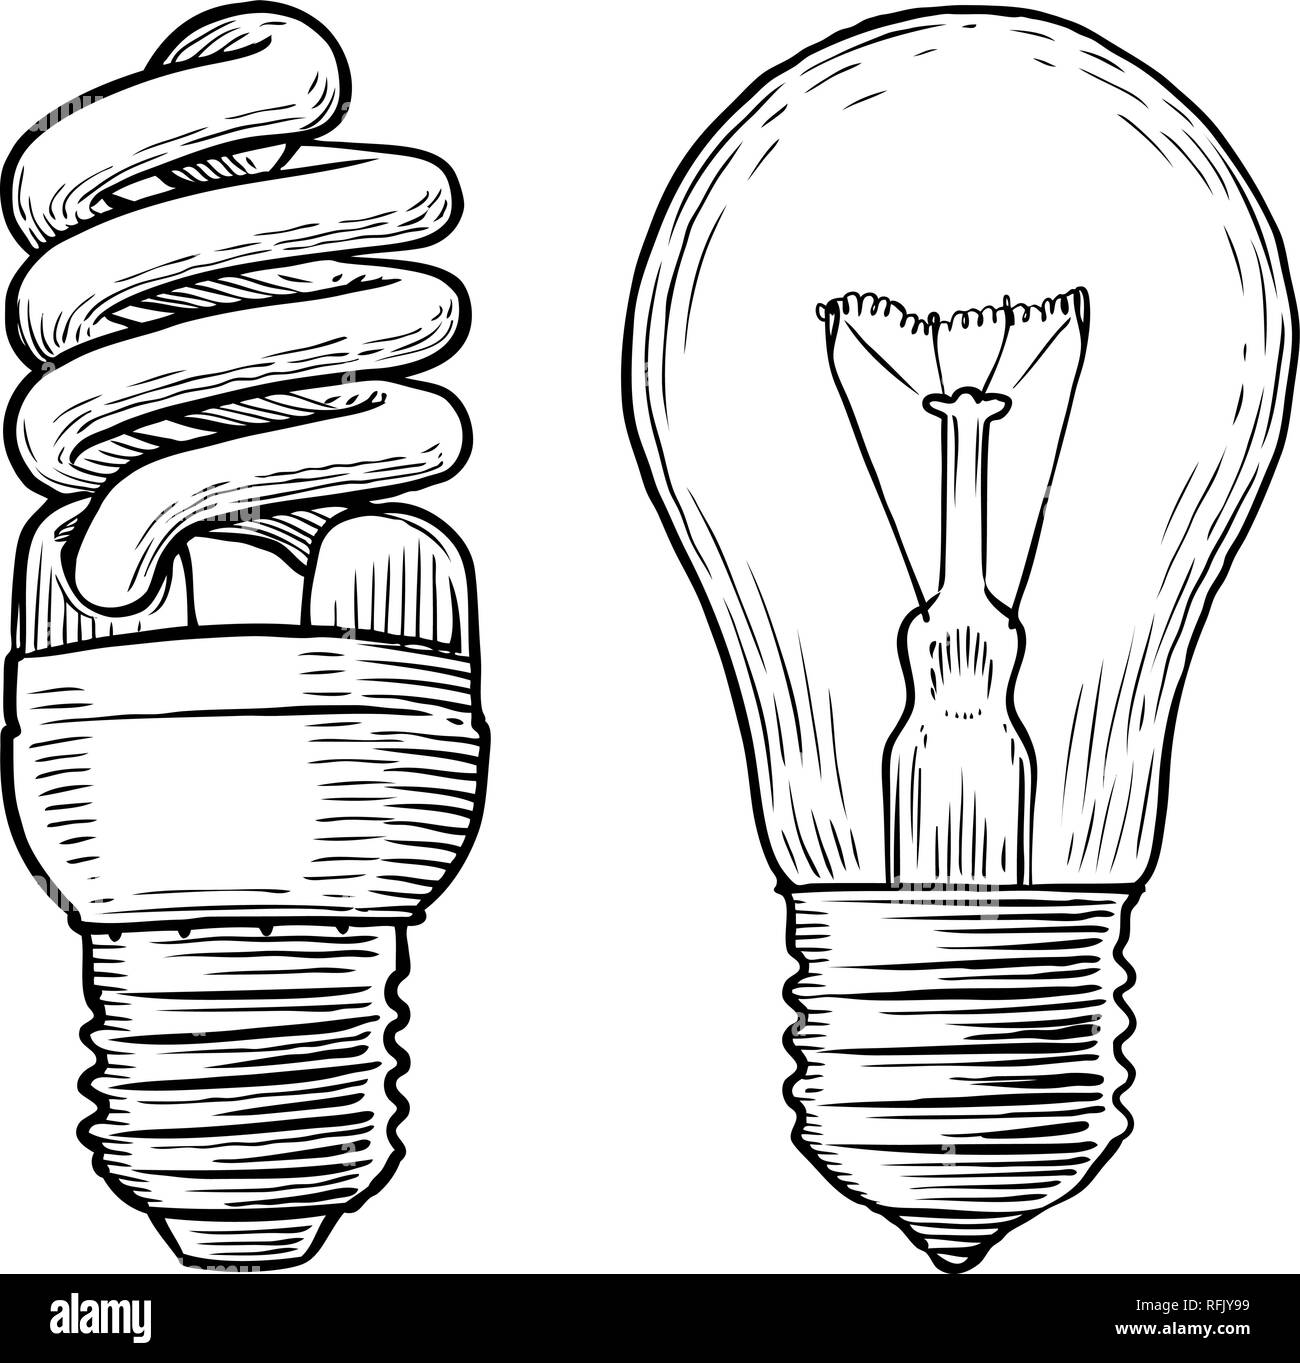 Bulb, lamp sketch. Electricity, electric light, energy concept. Hand drawn vector Stock Vector